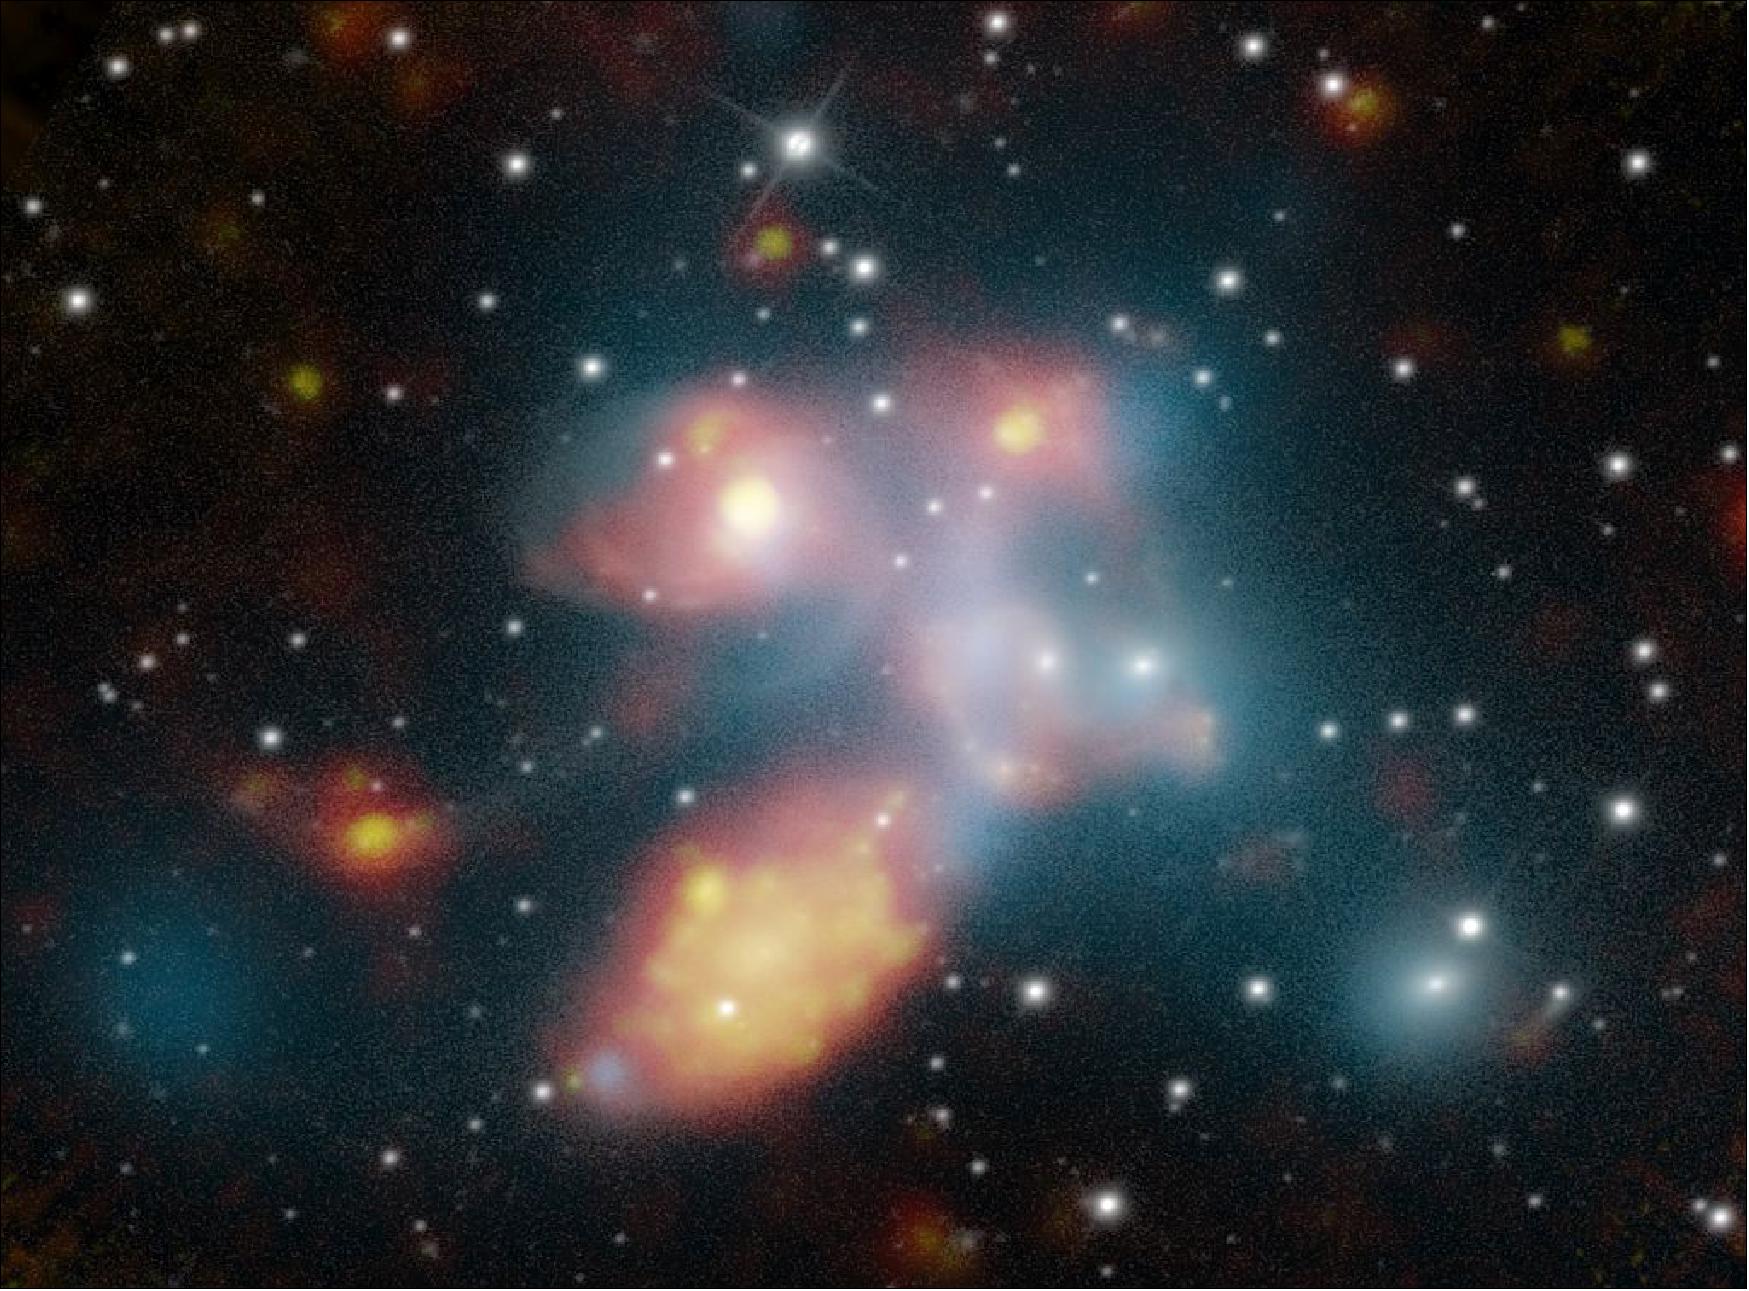 Figure 47: A multicolor view of the galaxies in Stephan's Quintet as revealed by Herschel, XMM-Newton and ground observatories [image credit: ESA/XMM-Newton (X-rays); ESA/Herschel/PACS, SPIRE (infrared); SDSS (optical)]